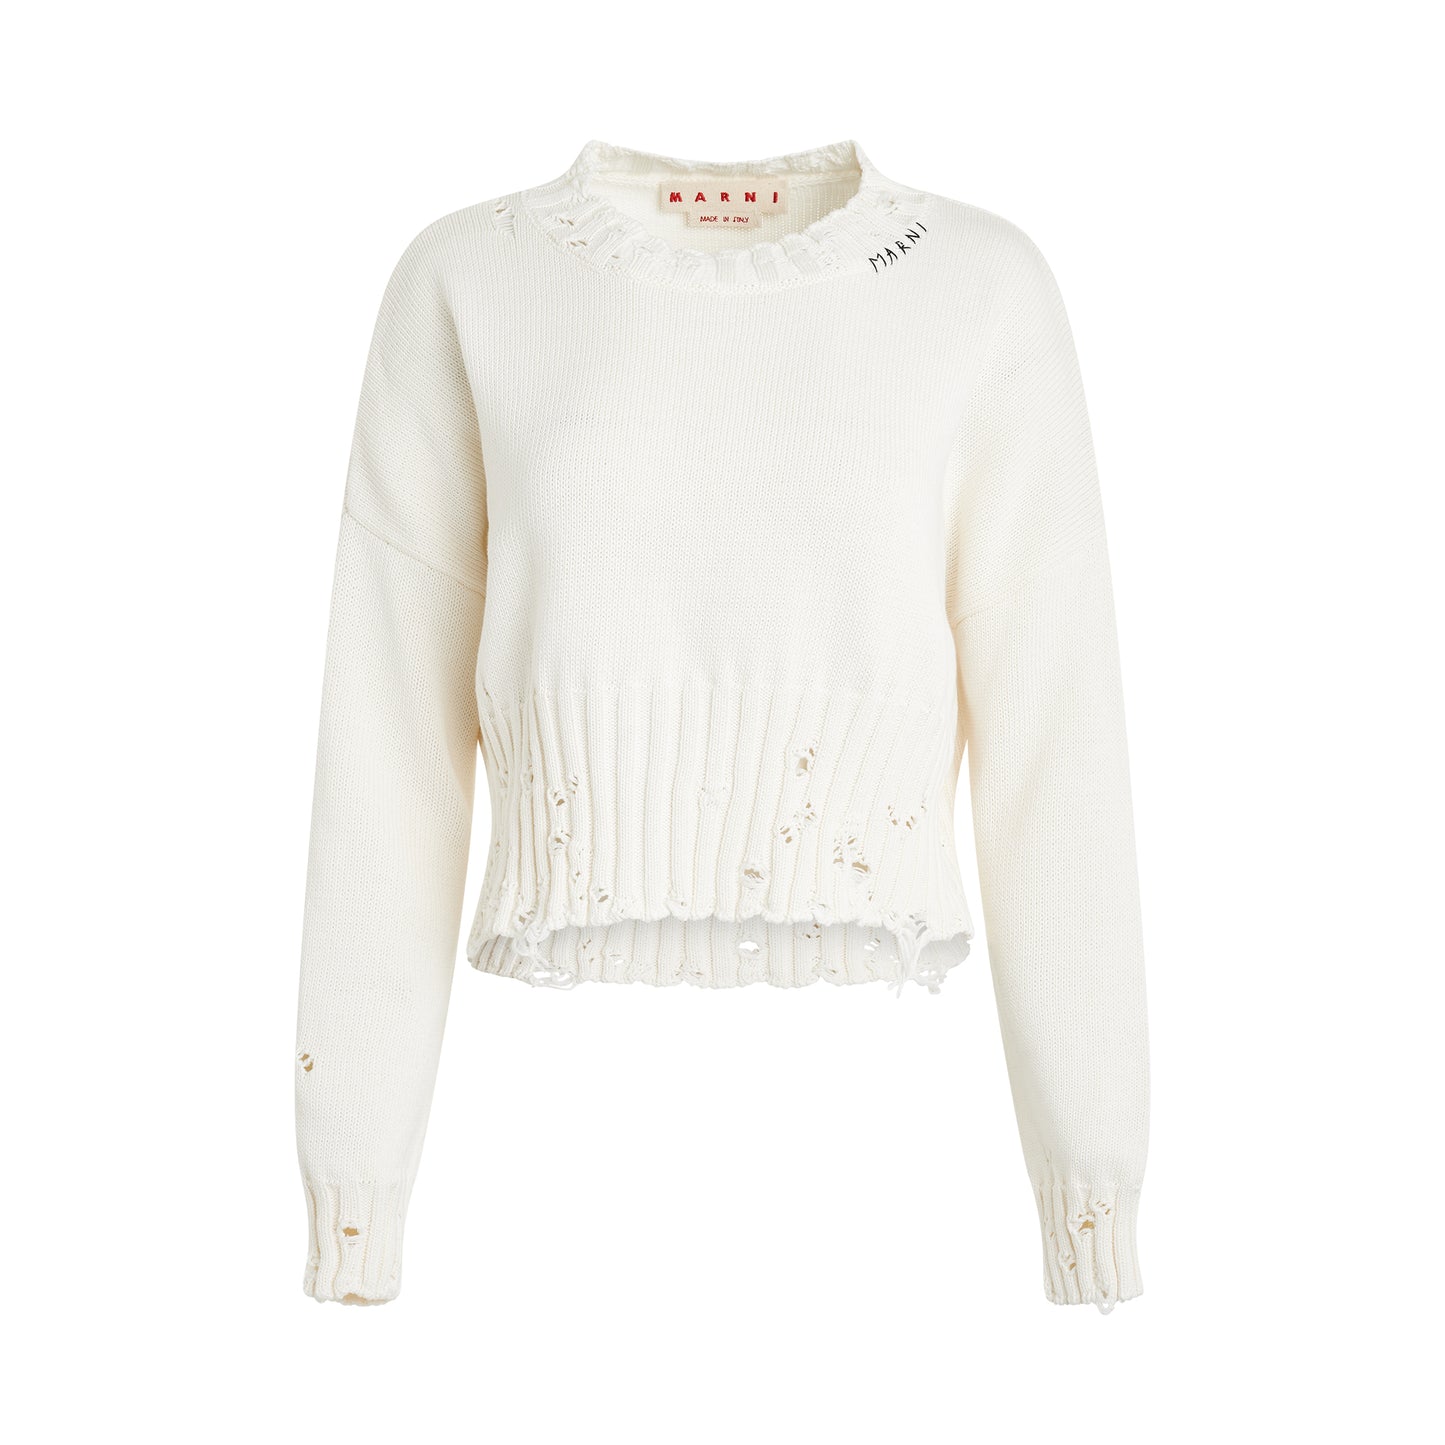 Distressed Cropped Sweater in White